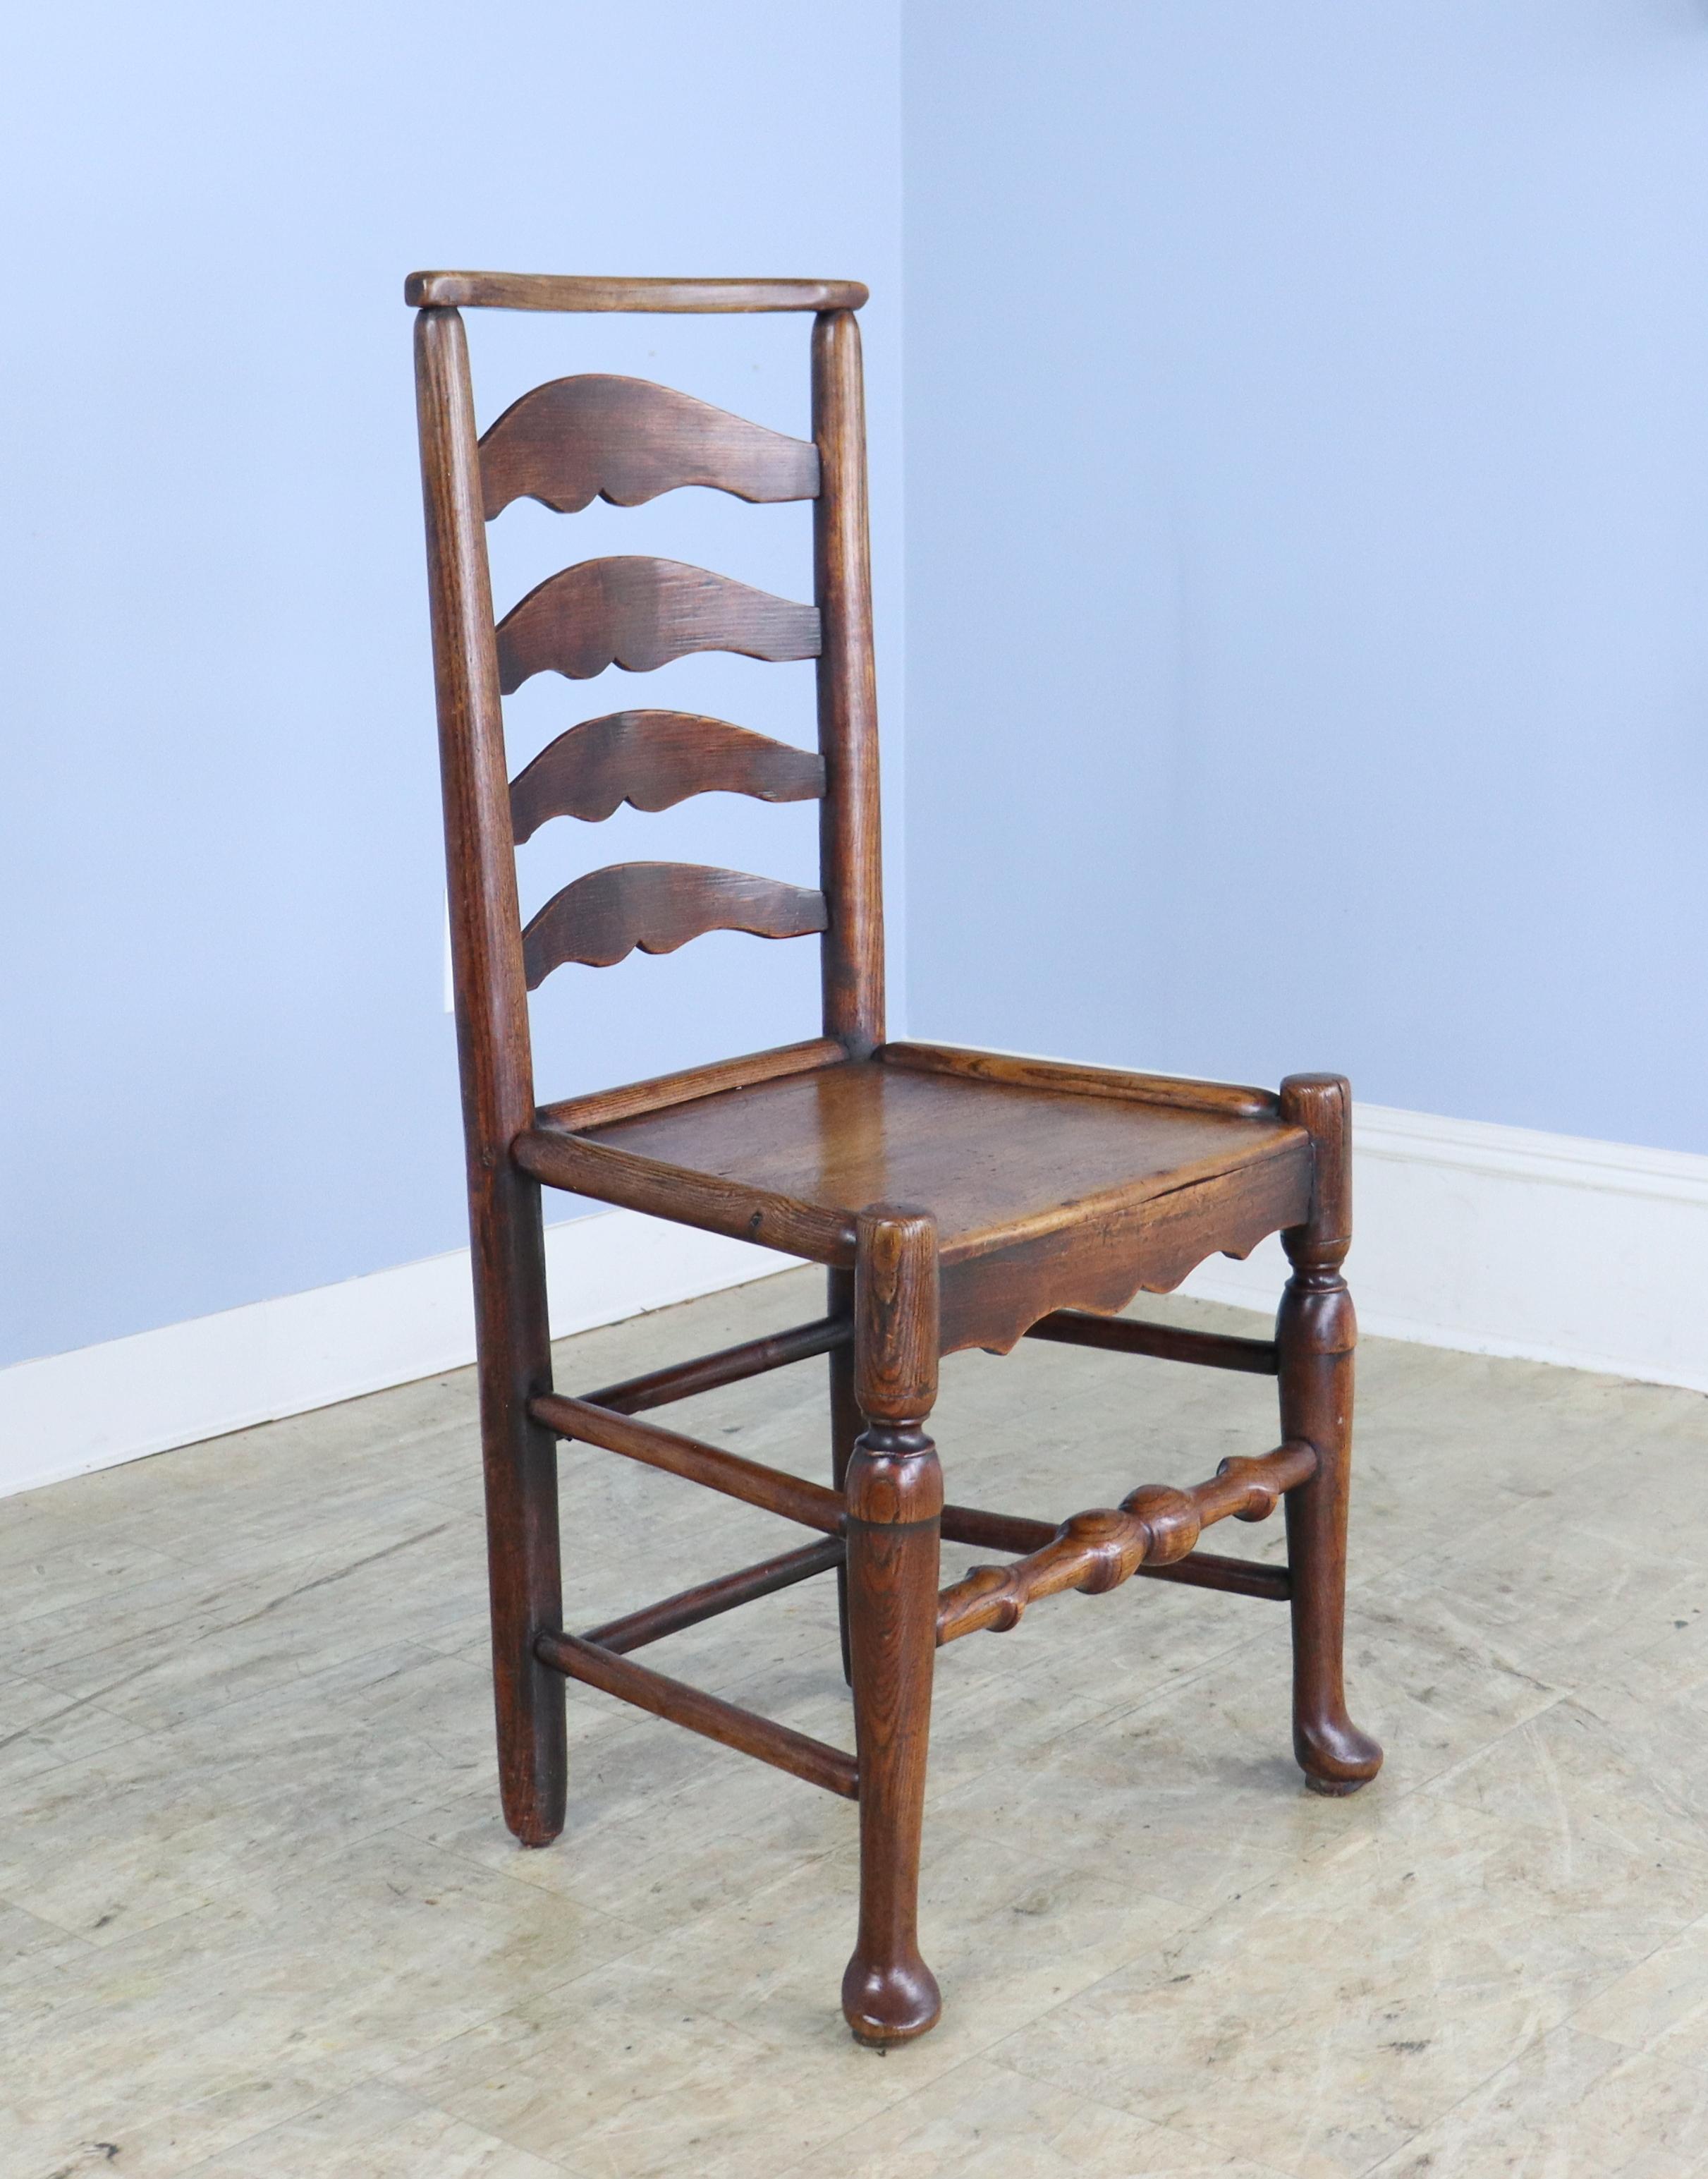 A set of 6 early Welsh dining chairs with charming ladderbacks and pad feet. Mid 18th Century and handmade, there are slight variations in each chair, shown in thumbnails.  While the seat height of 17.5